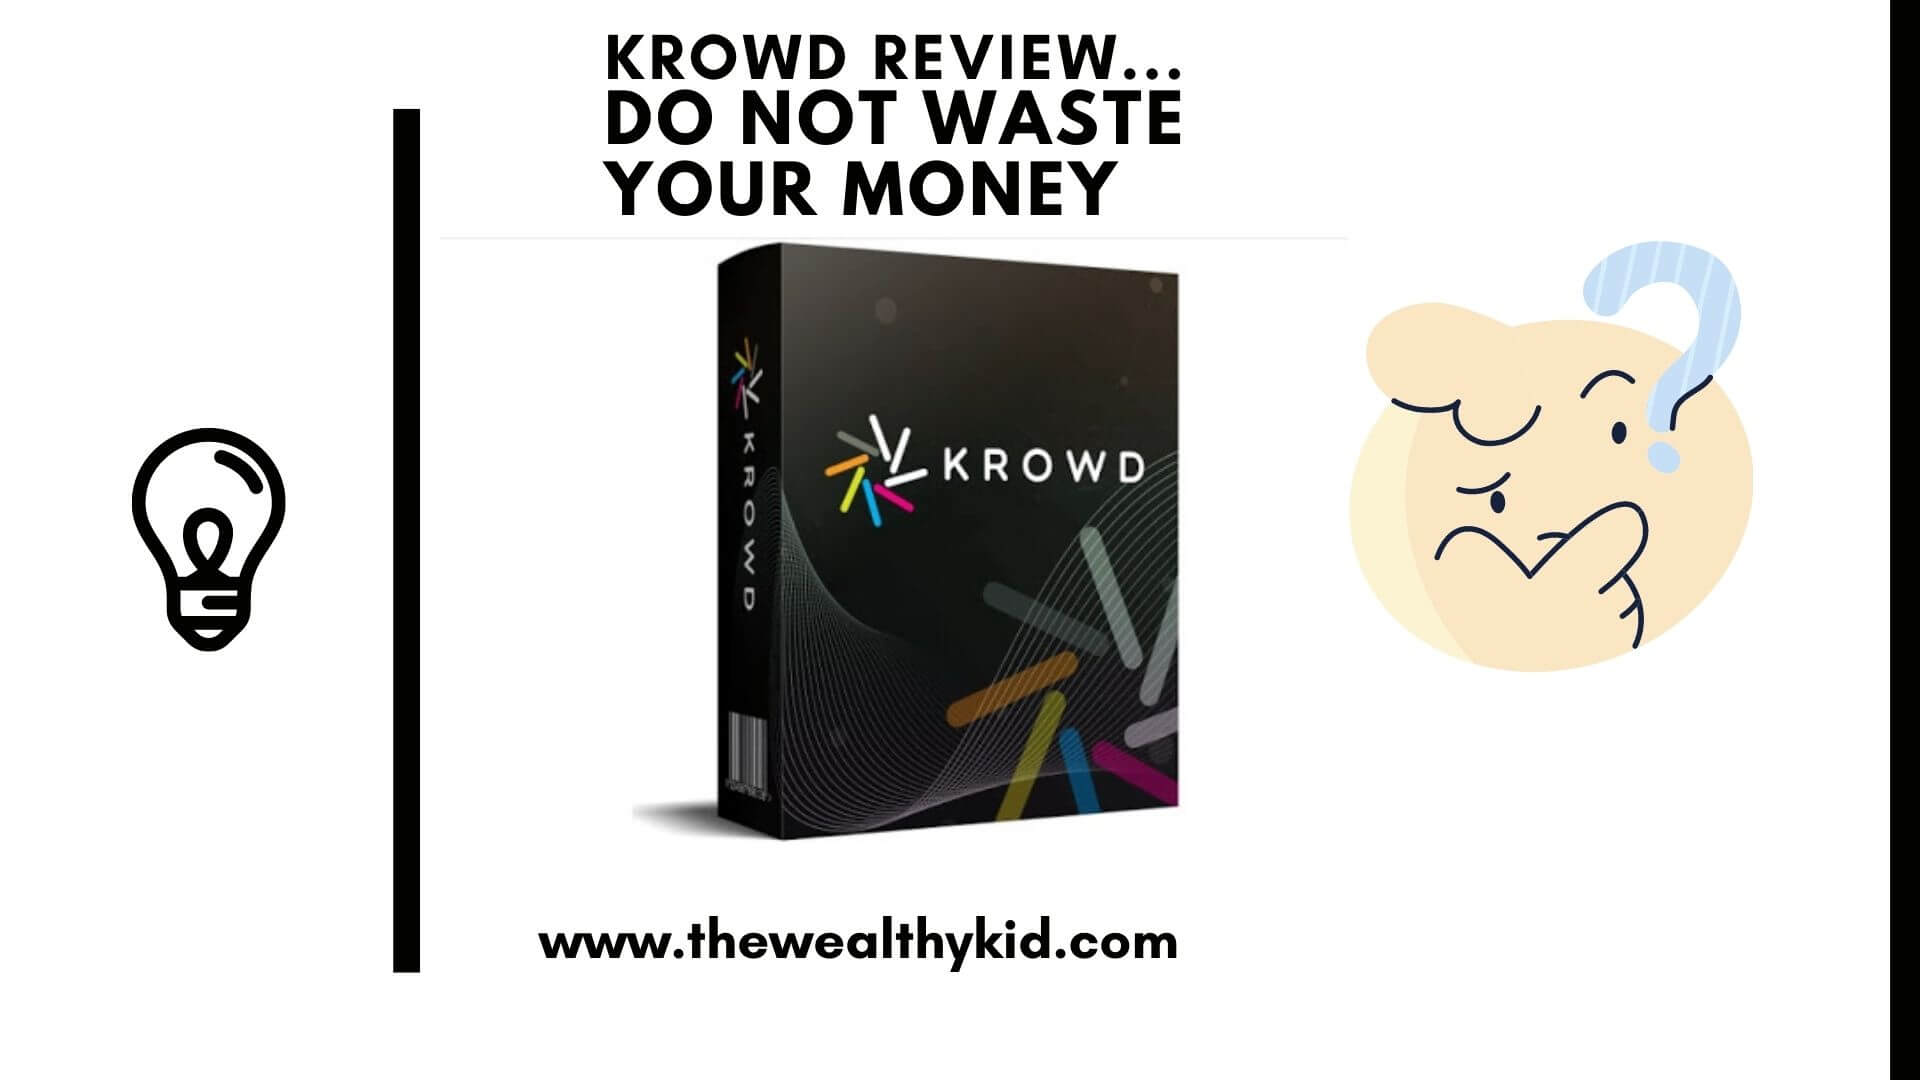 What is Krowd software